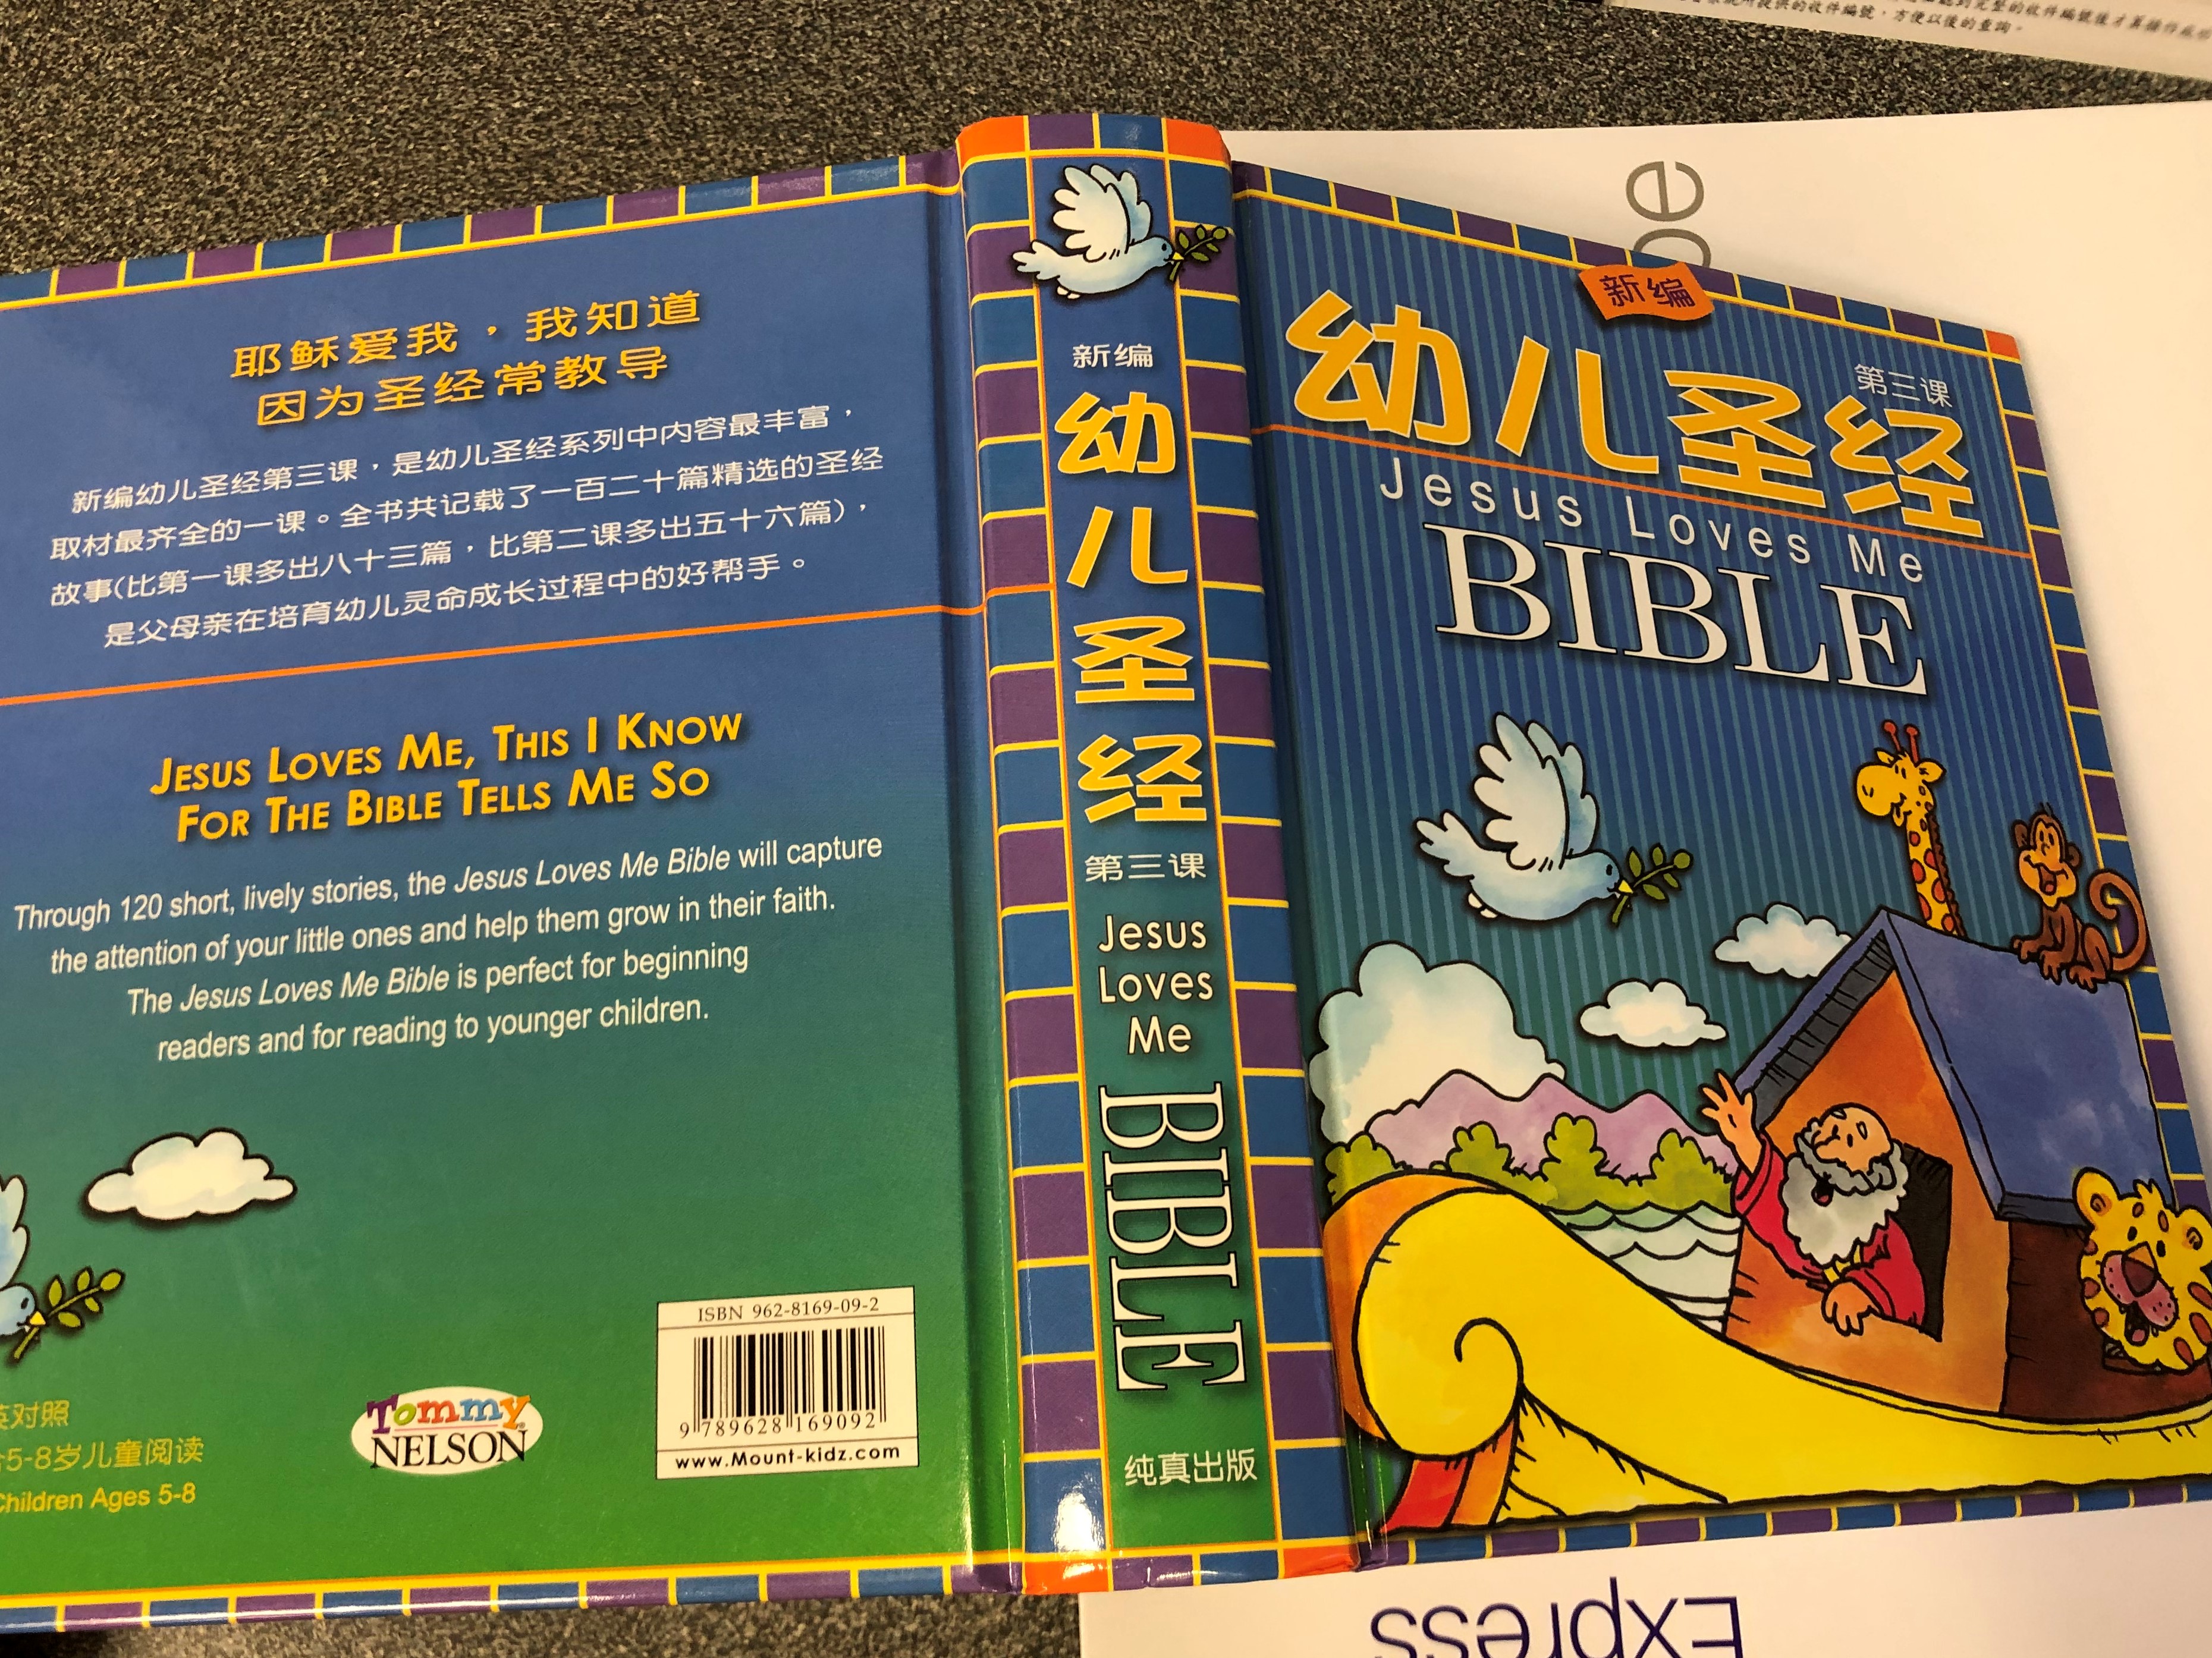 jesus-loves-me-bible-children-s-bible-in-chinese-for-children-of-5-8-age-hardcover-2001-tommy-nelson-usa-17-.jpg